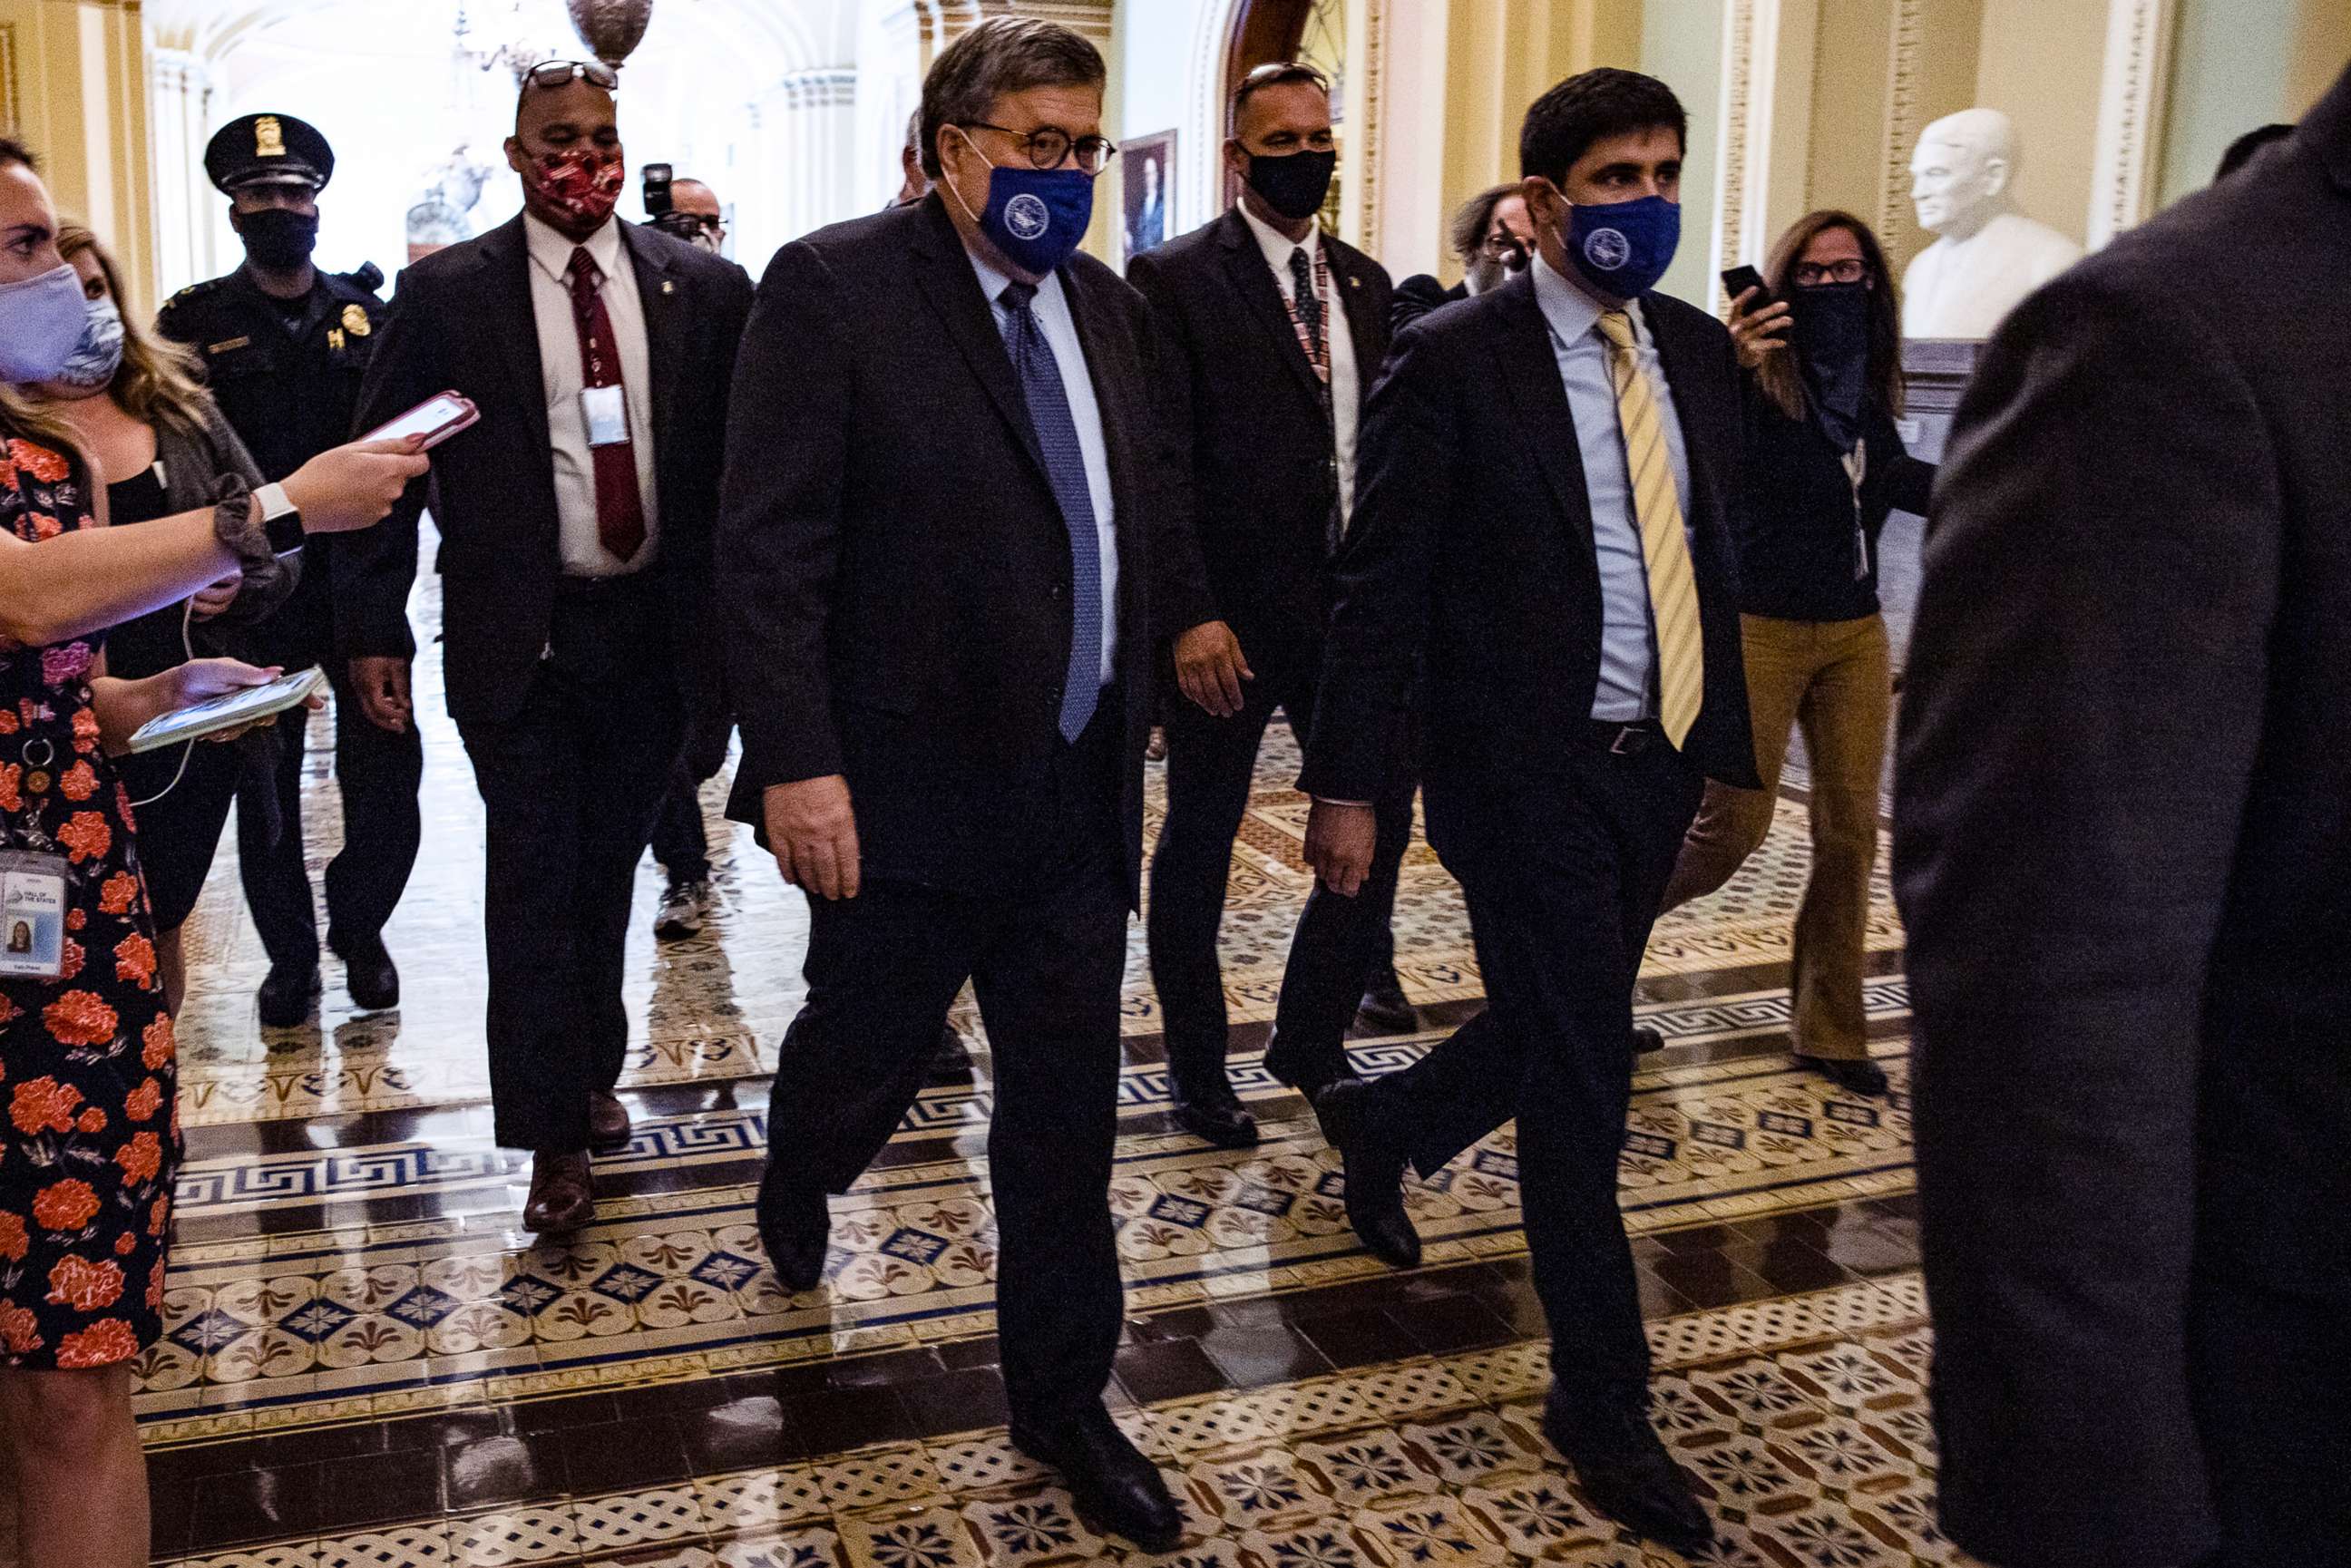 PHOTO: Attorney General Bill Barr leaves the U.S. Capitol after meeting with Senate Majority Leader Mitch McConnell in his office, Nov. 9, 2020 in Washington, D.C.